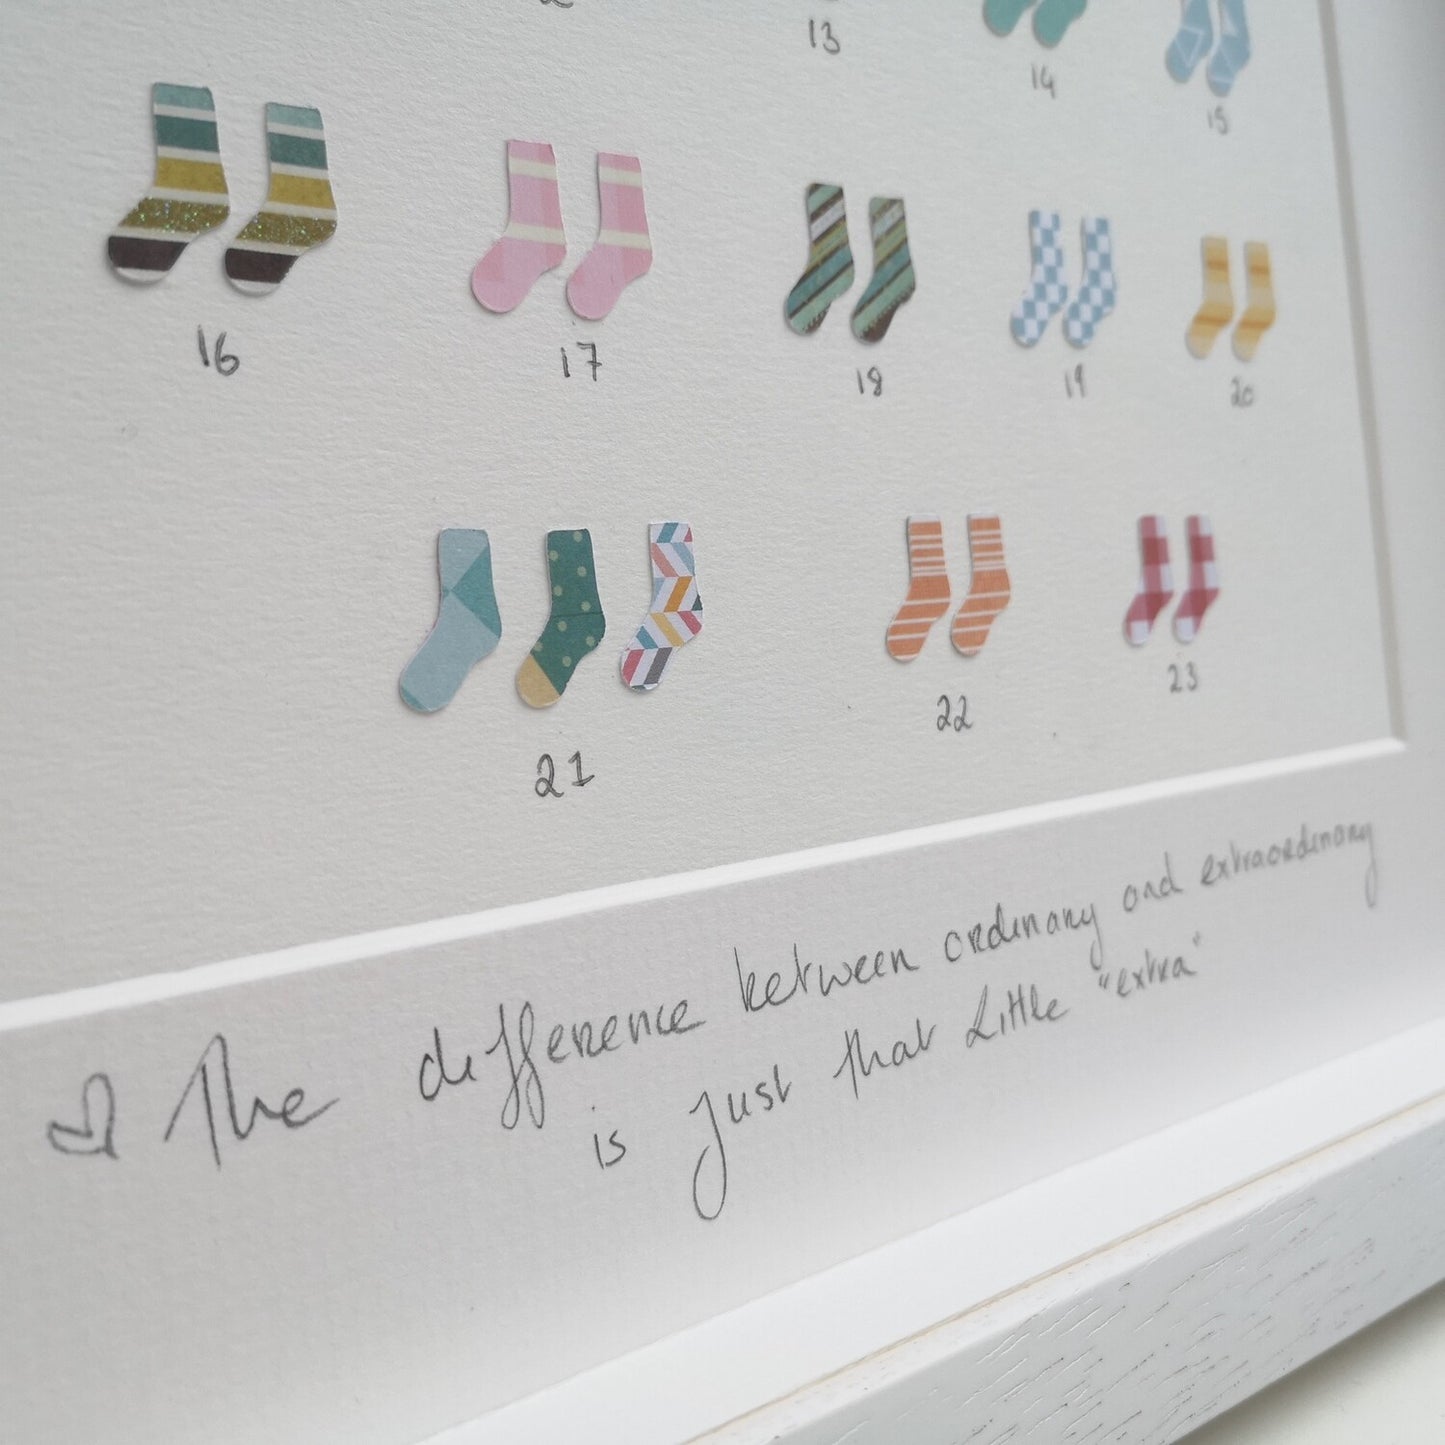 A close up of the 47 papercut socks in a handmade 30x30cm deep box wooden frame, celebrating the 47 chromosomes that people with Down Syndrome have.